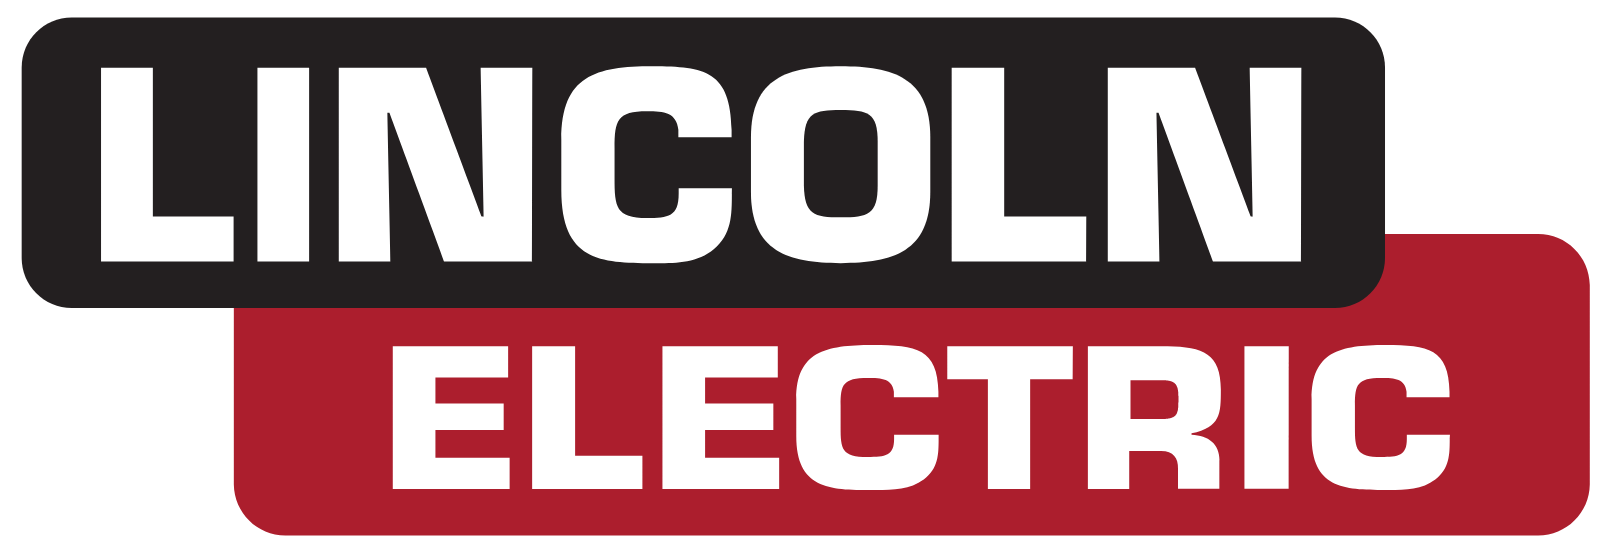 Lincoln Electric
 logo for dark backgrounds (transparent PNG)